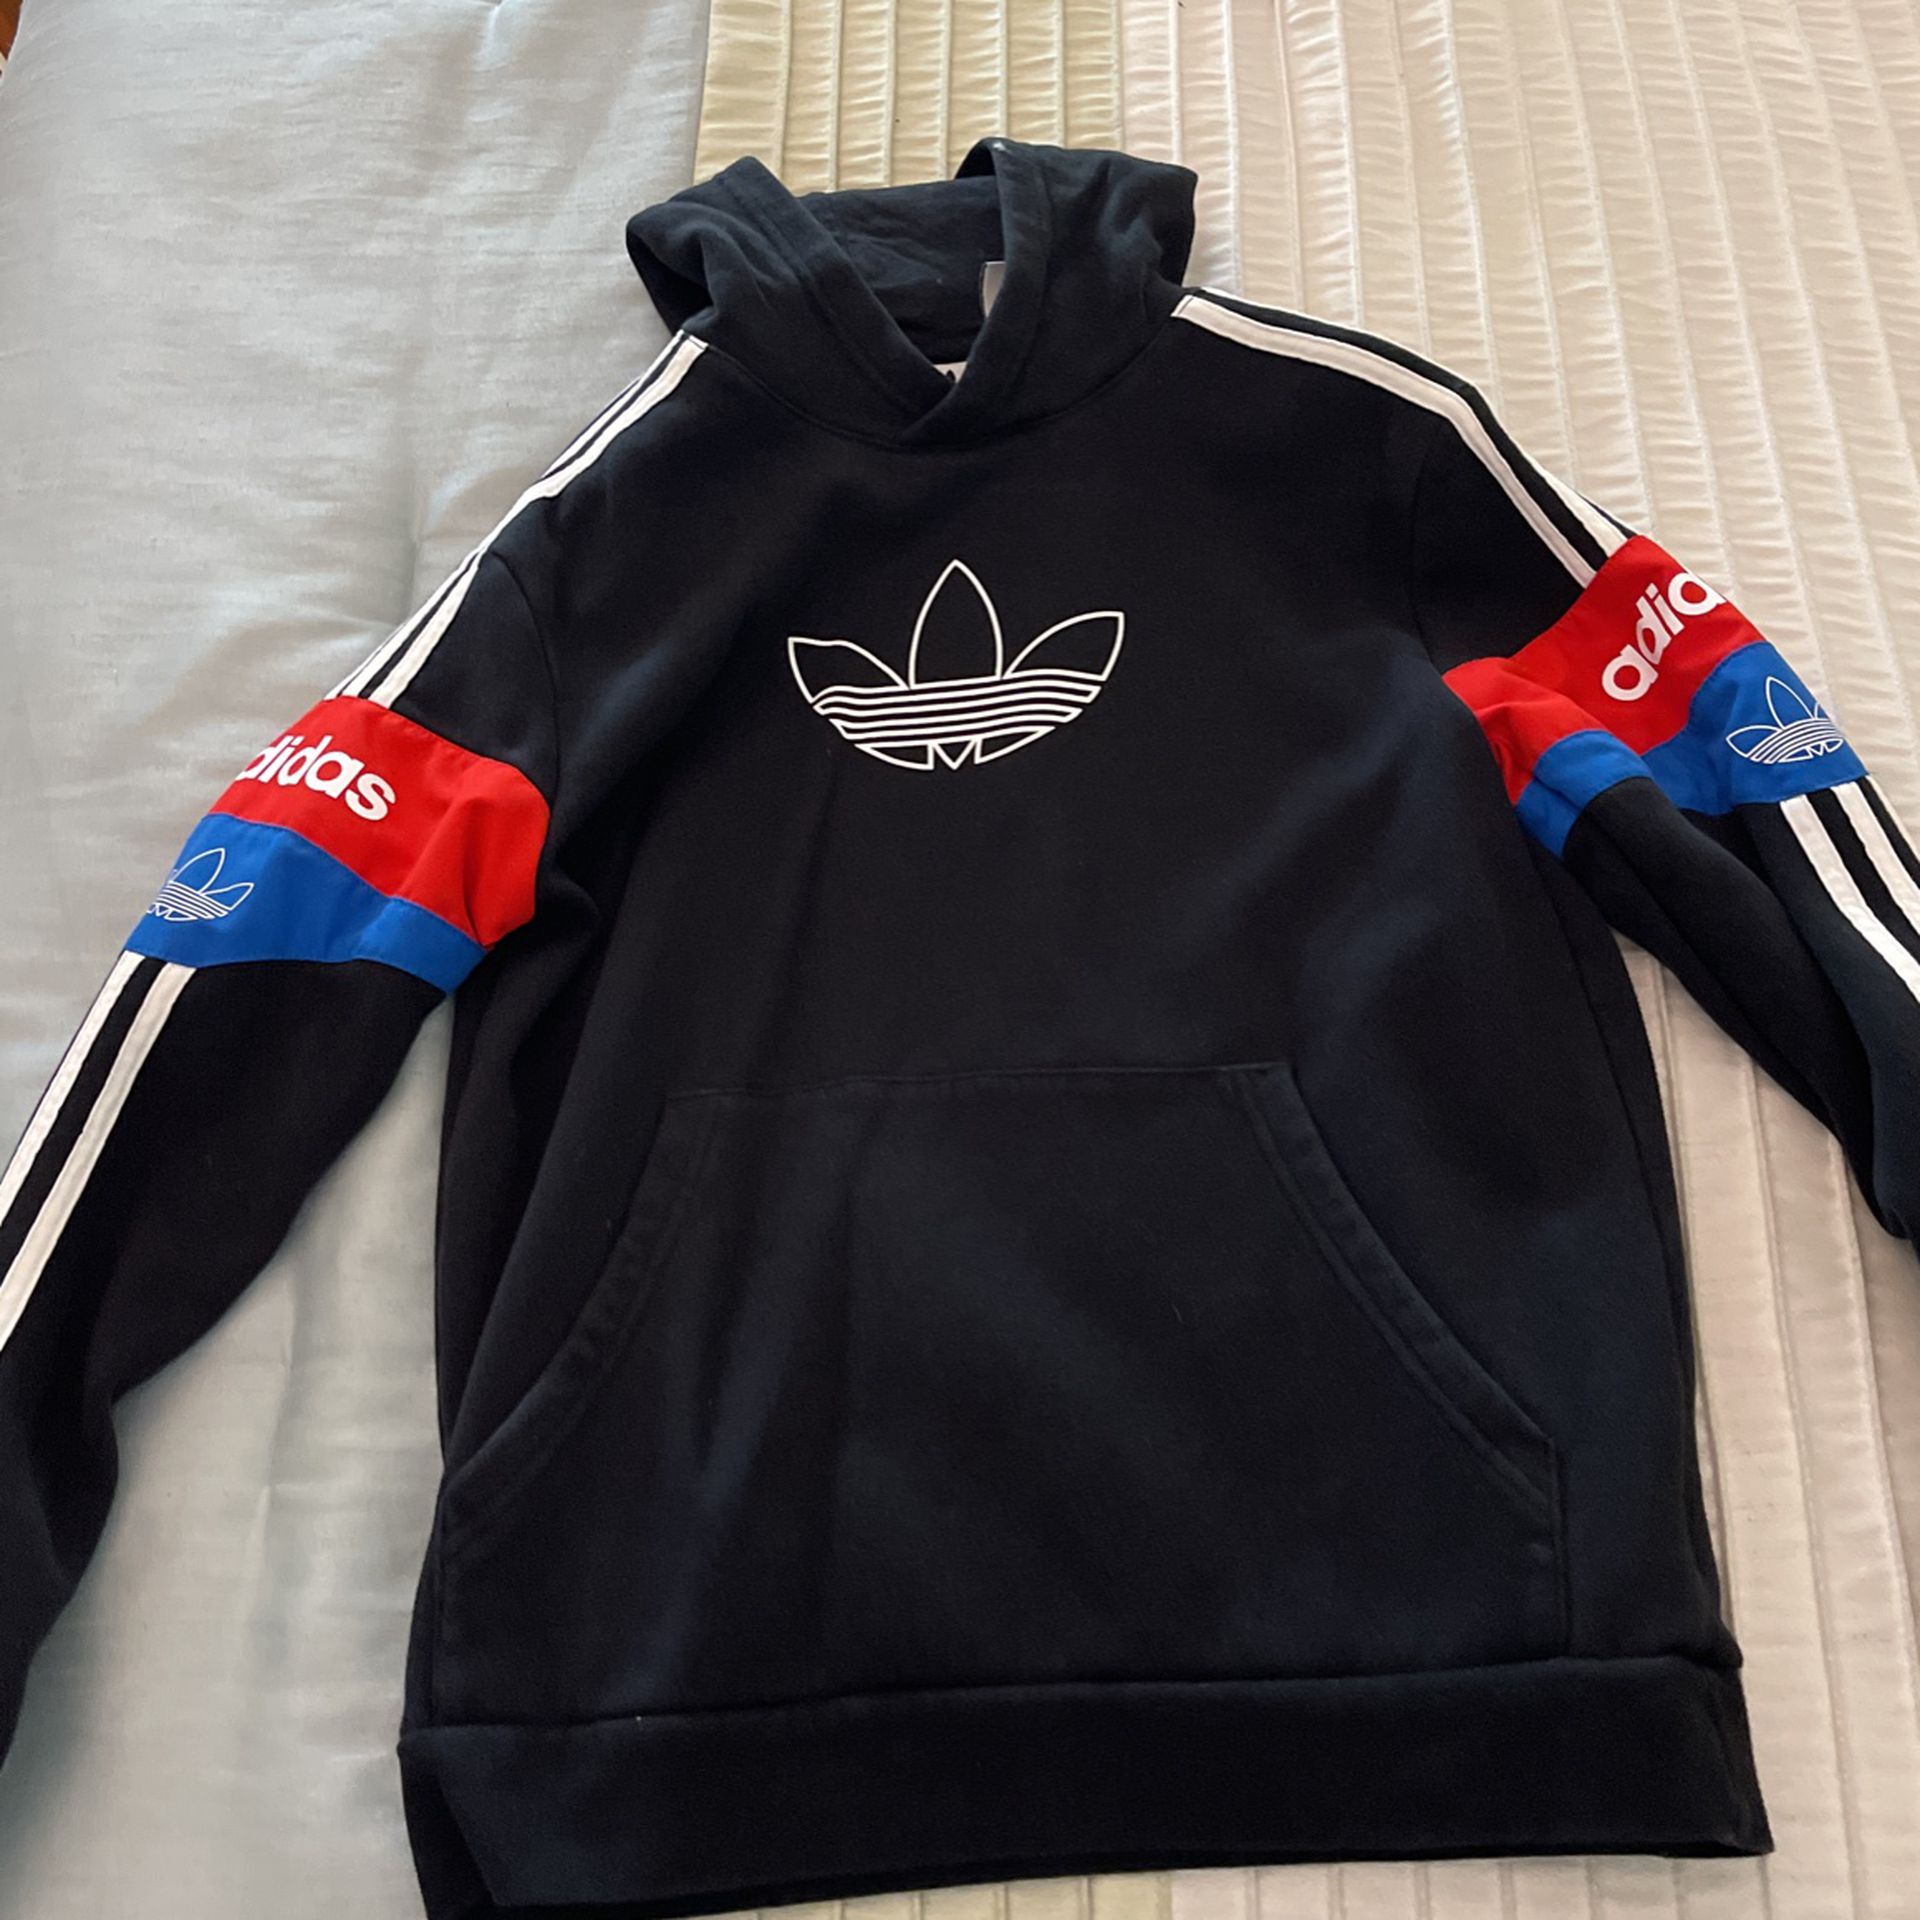 Adidas Hoodie For Kids Size Xlarge 